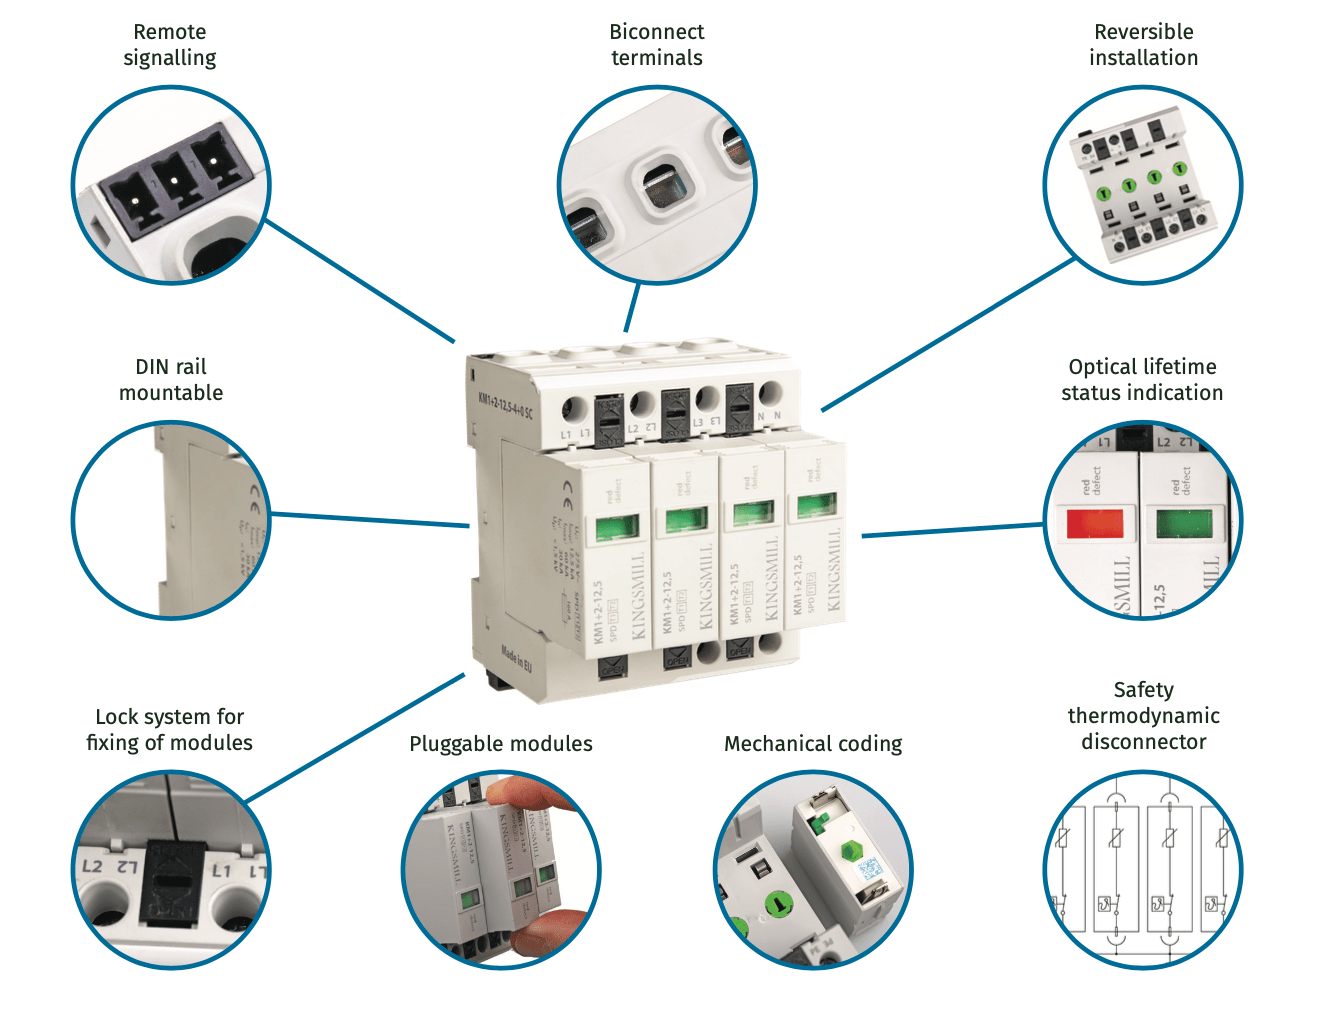 Components of a Surge Protection Device